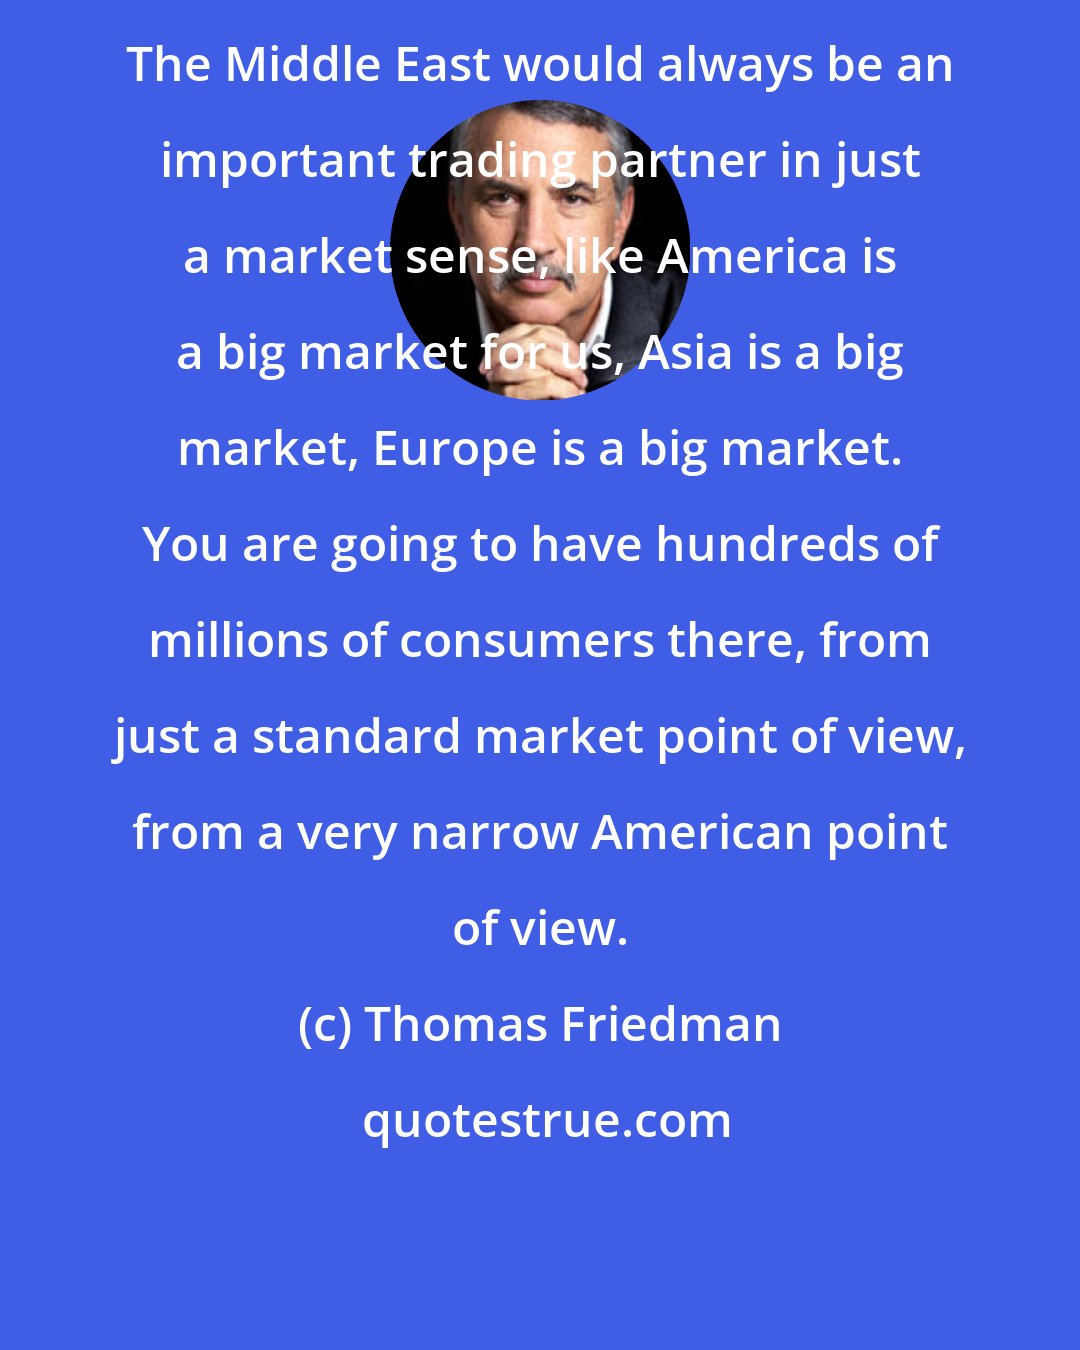 Thomas Friedman: The Middle East would always be an important trading partner in just a market sense, like America is a big market for us, Asia is a big market, Europe is a big market. You are going to have hundreds of millions of consumers there, from just a standard market point of view, from a very narrow American point of view.